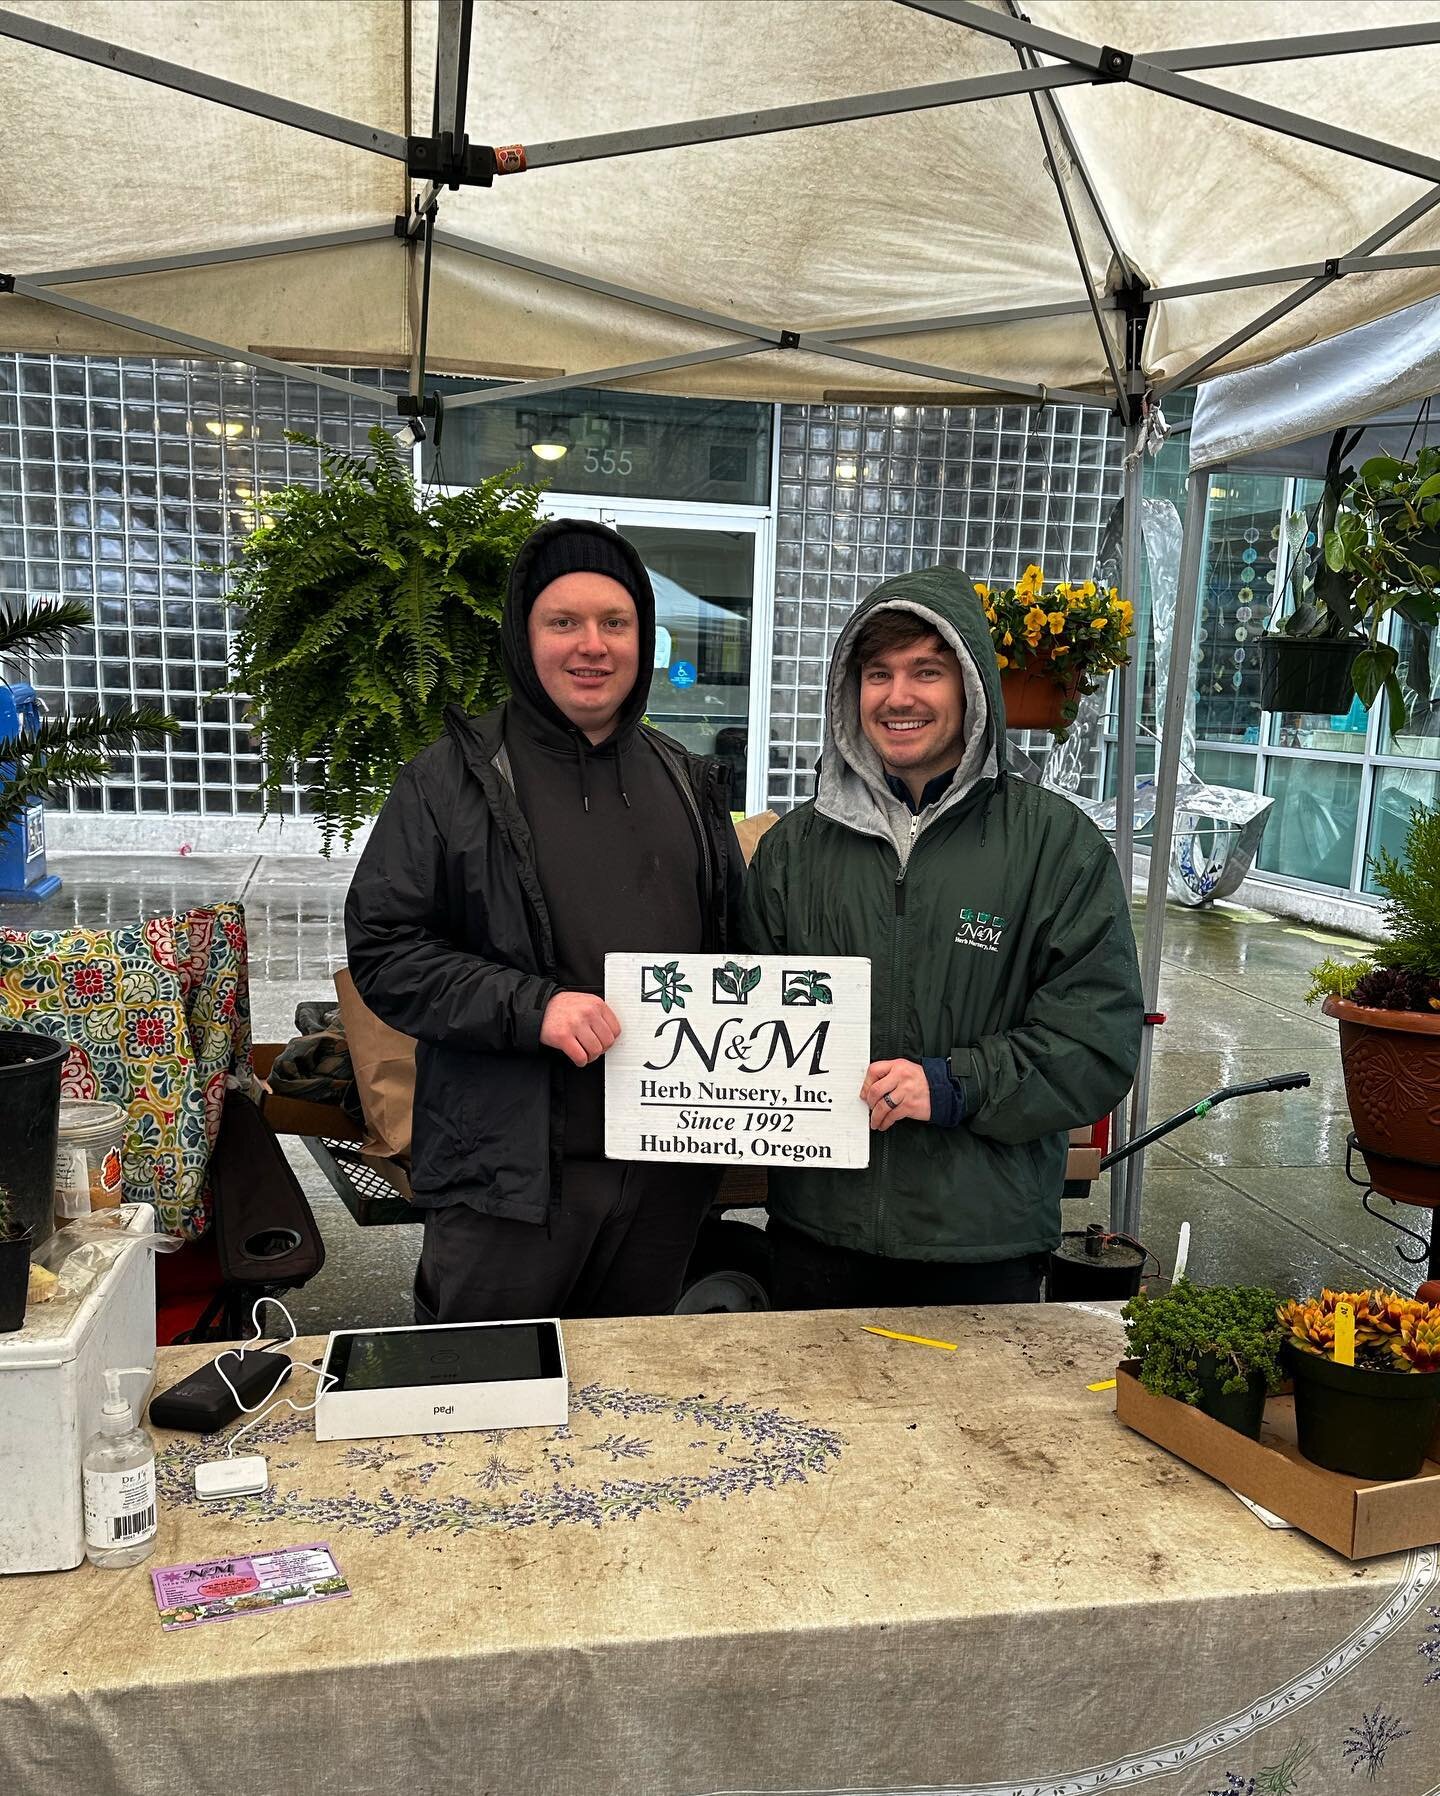 Meet our 2023 Vancouver Farmers Market team, Michael and Thomas who are very excited to get this season started! 🌿

&bull;Many of you recognize Michael who has been at the market since 2015. He is our Vancouver plant guru! 
&bull;Thomas is Michael&r